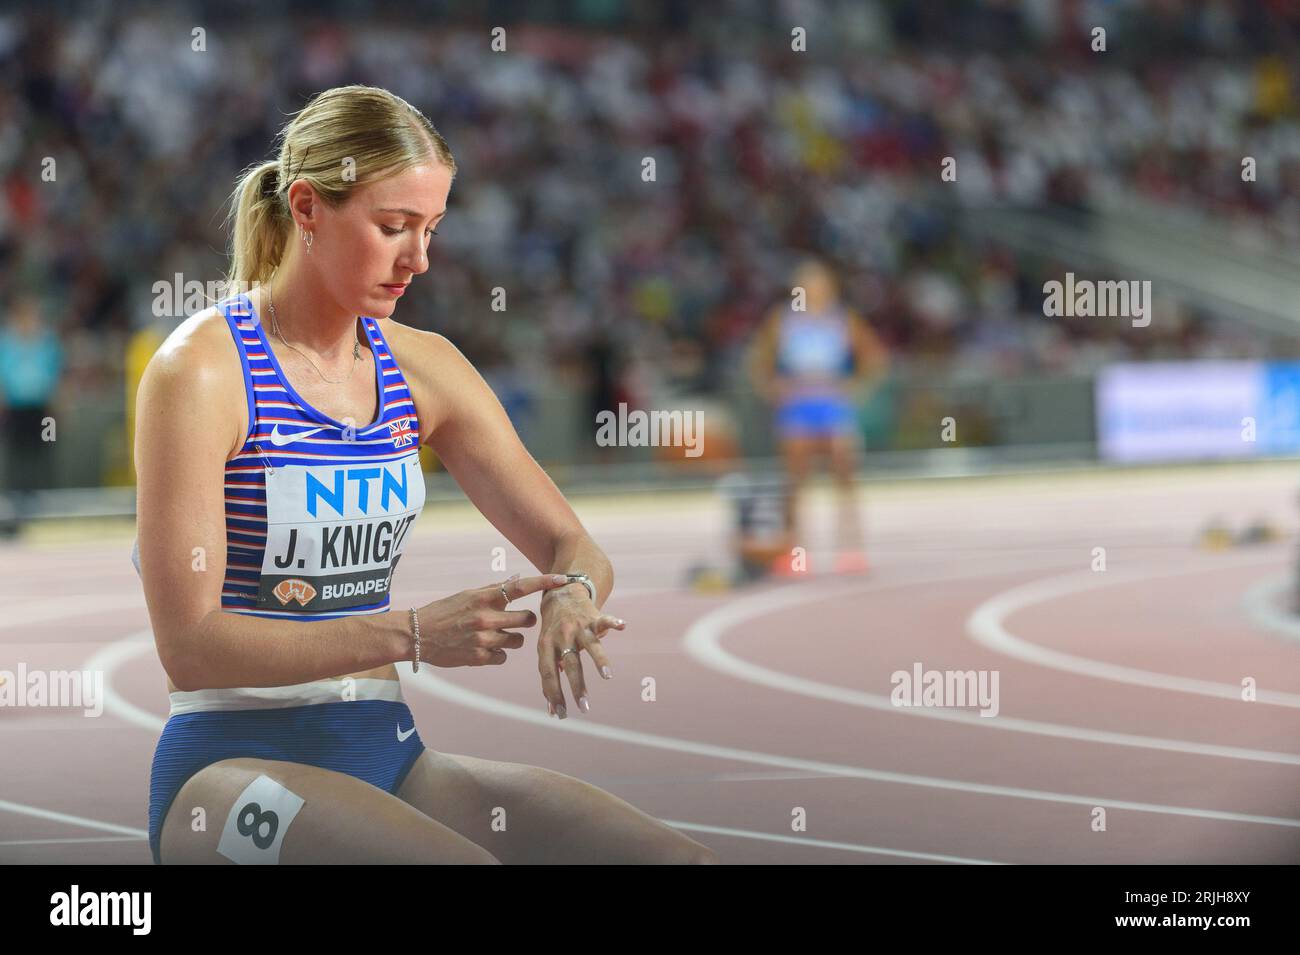 Jessie Knight (Great Britain and Northern Ireland) checking her watch before the 400 metres hurdles semi-final during the world athletics championships 2023 at the National Athletics Centre, in Budapest, Hungary